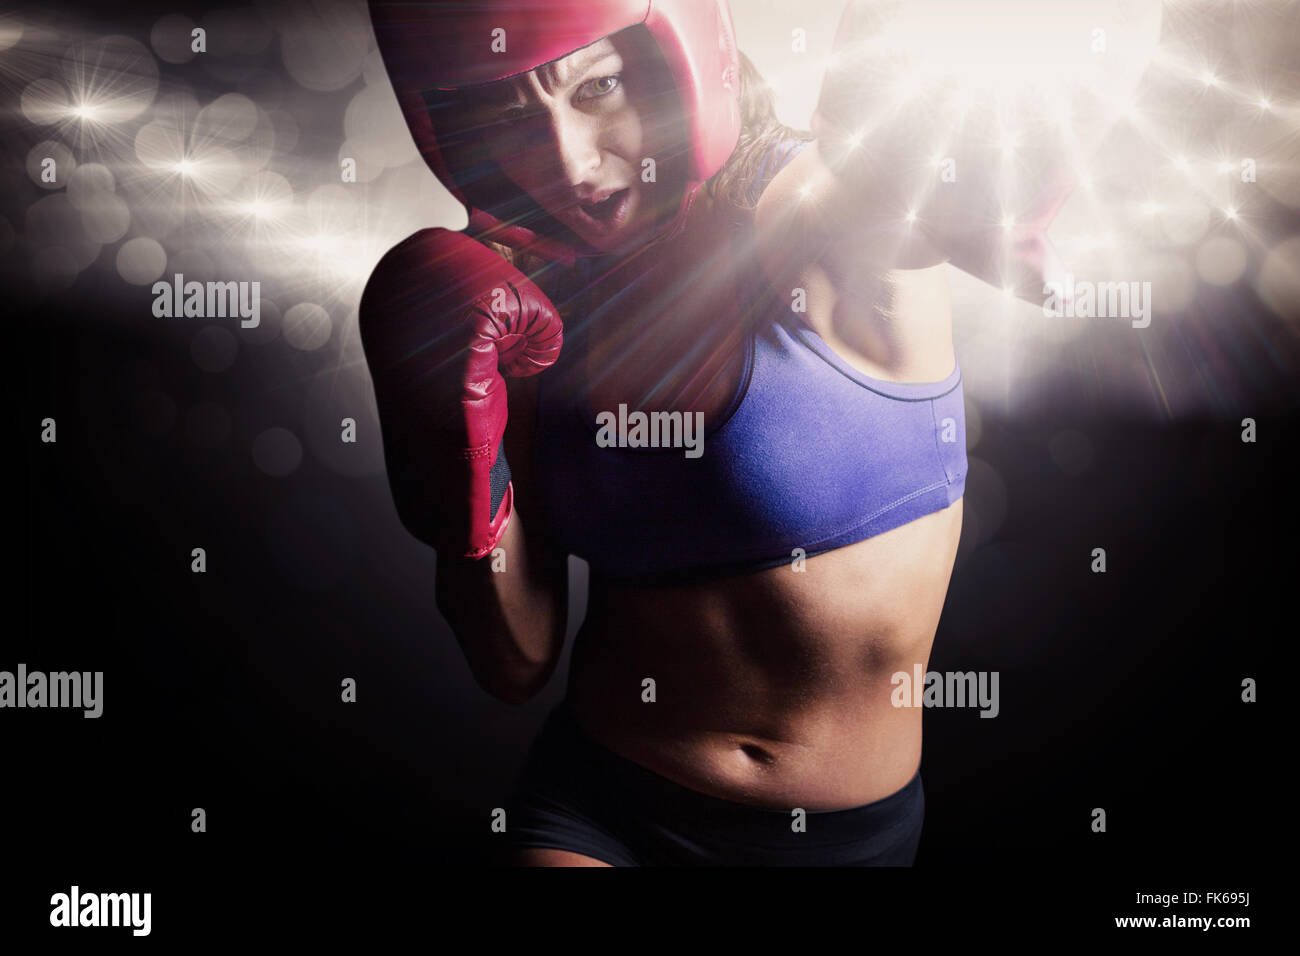 Composite image of female boxer with gloves and headgear punching Stock Photo